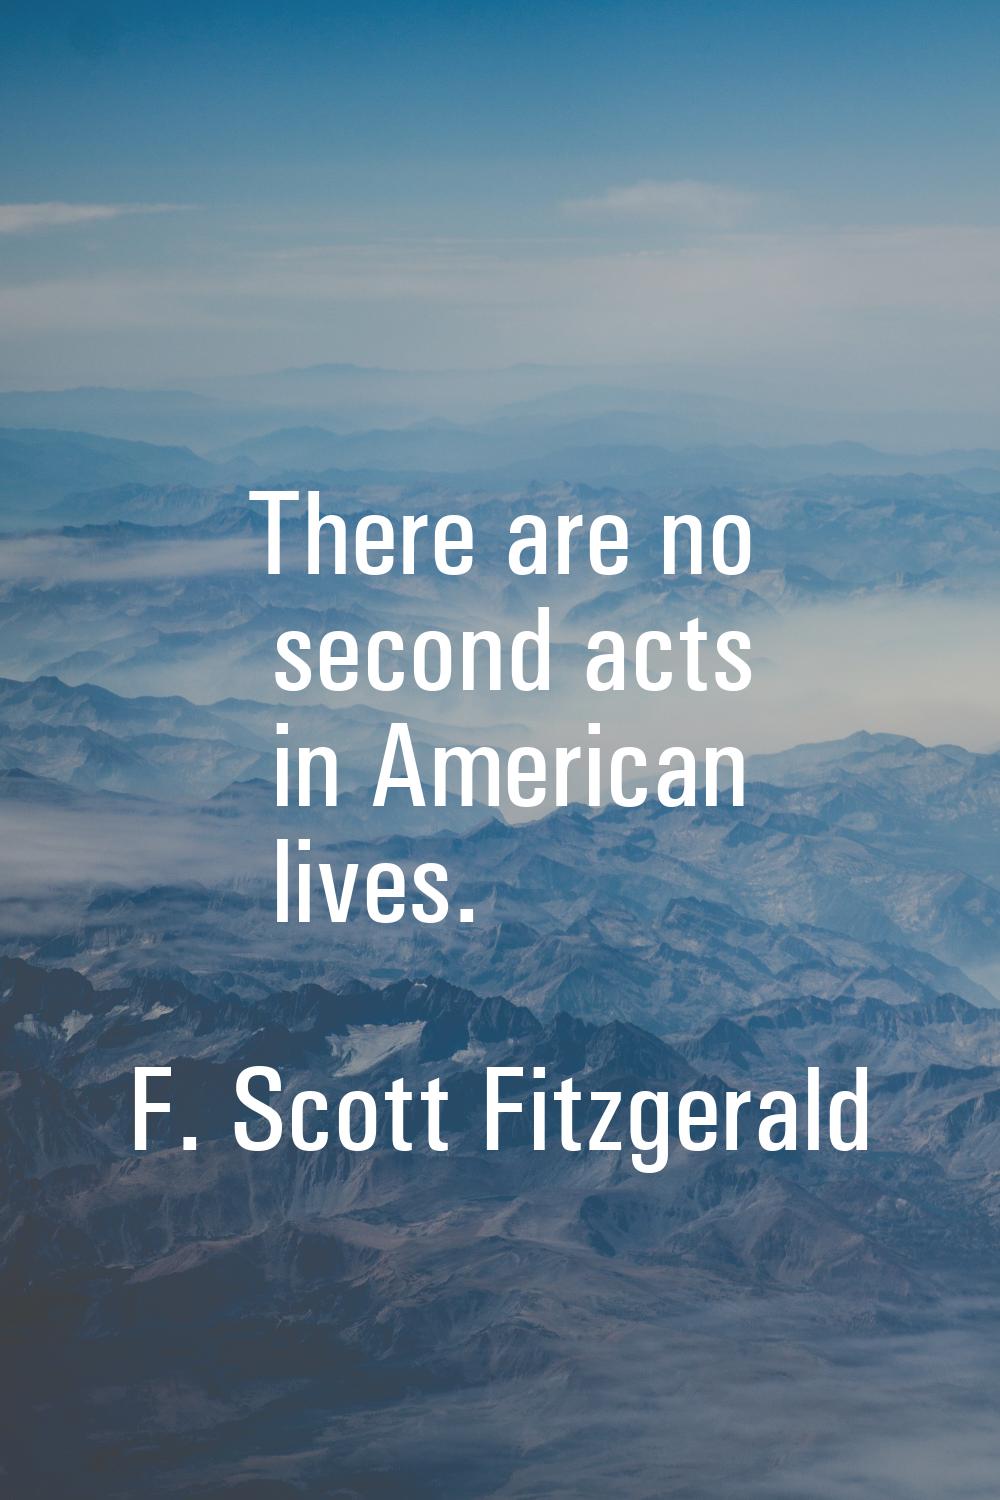 There are no second acts in American lives.